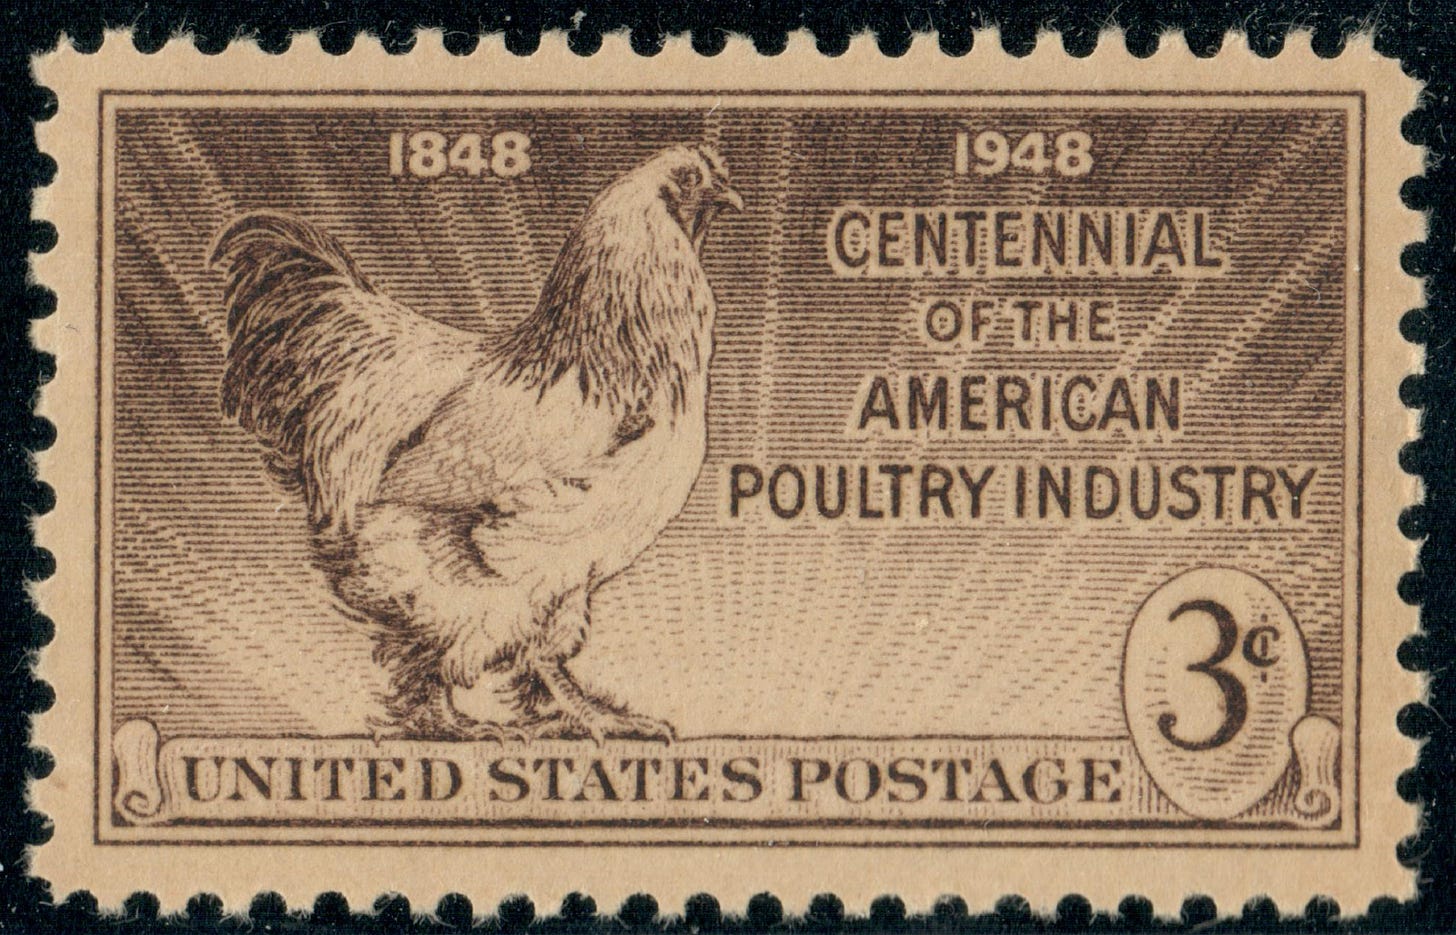 USA - 1948 - Poultry industry - Gallus gallus domesticus - 3¢ - #2966 - Picture 1 of 1